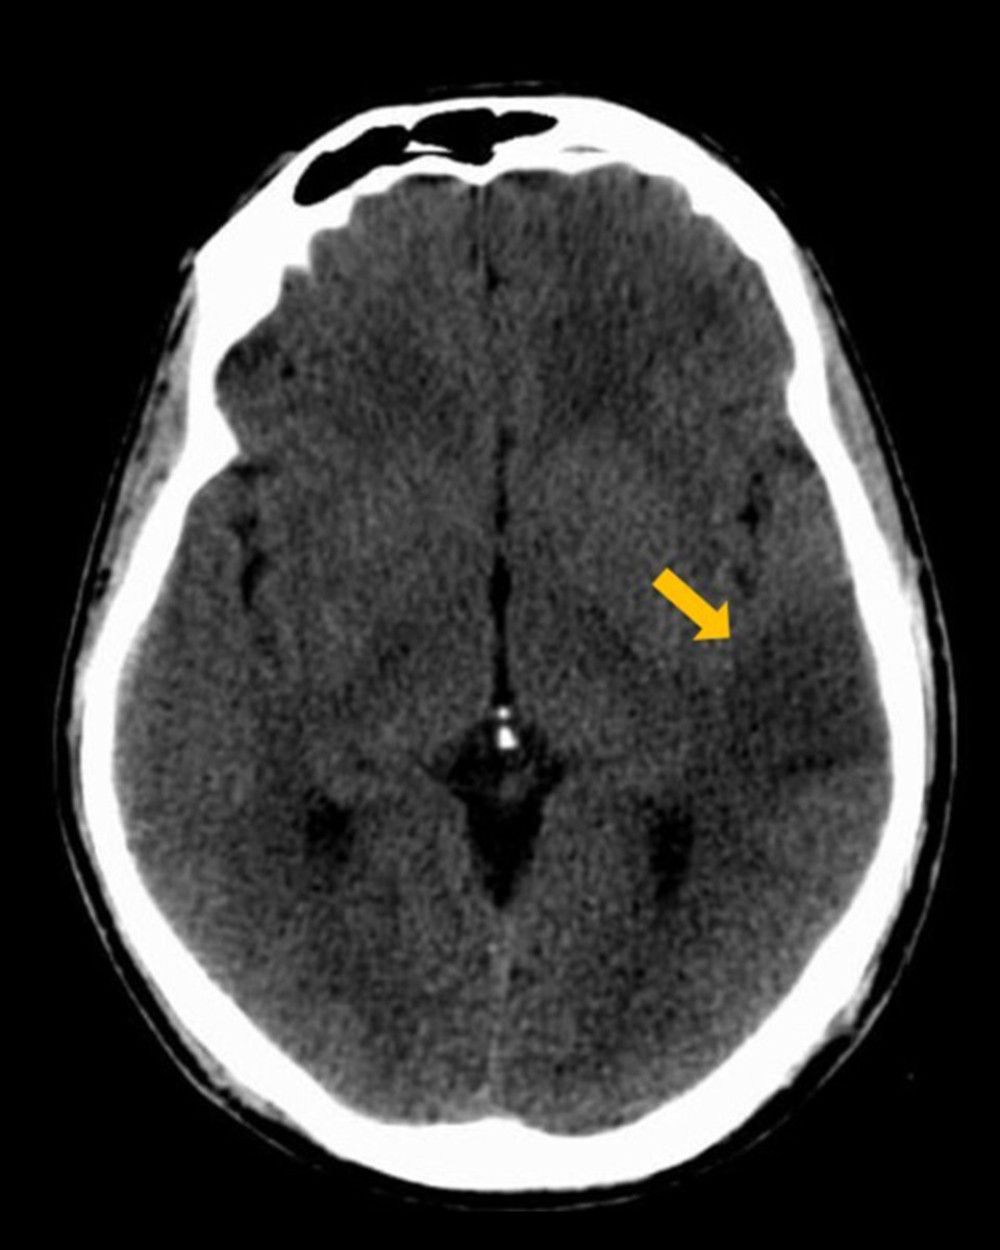 Non-contrast head computed tomography on second Emergency Department visit revealed hypodensity in the left temporal lobe.